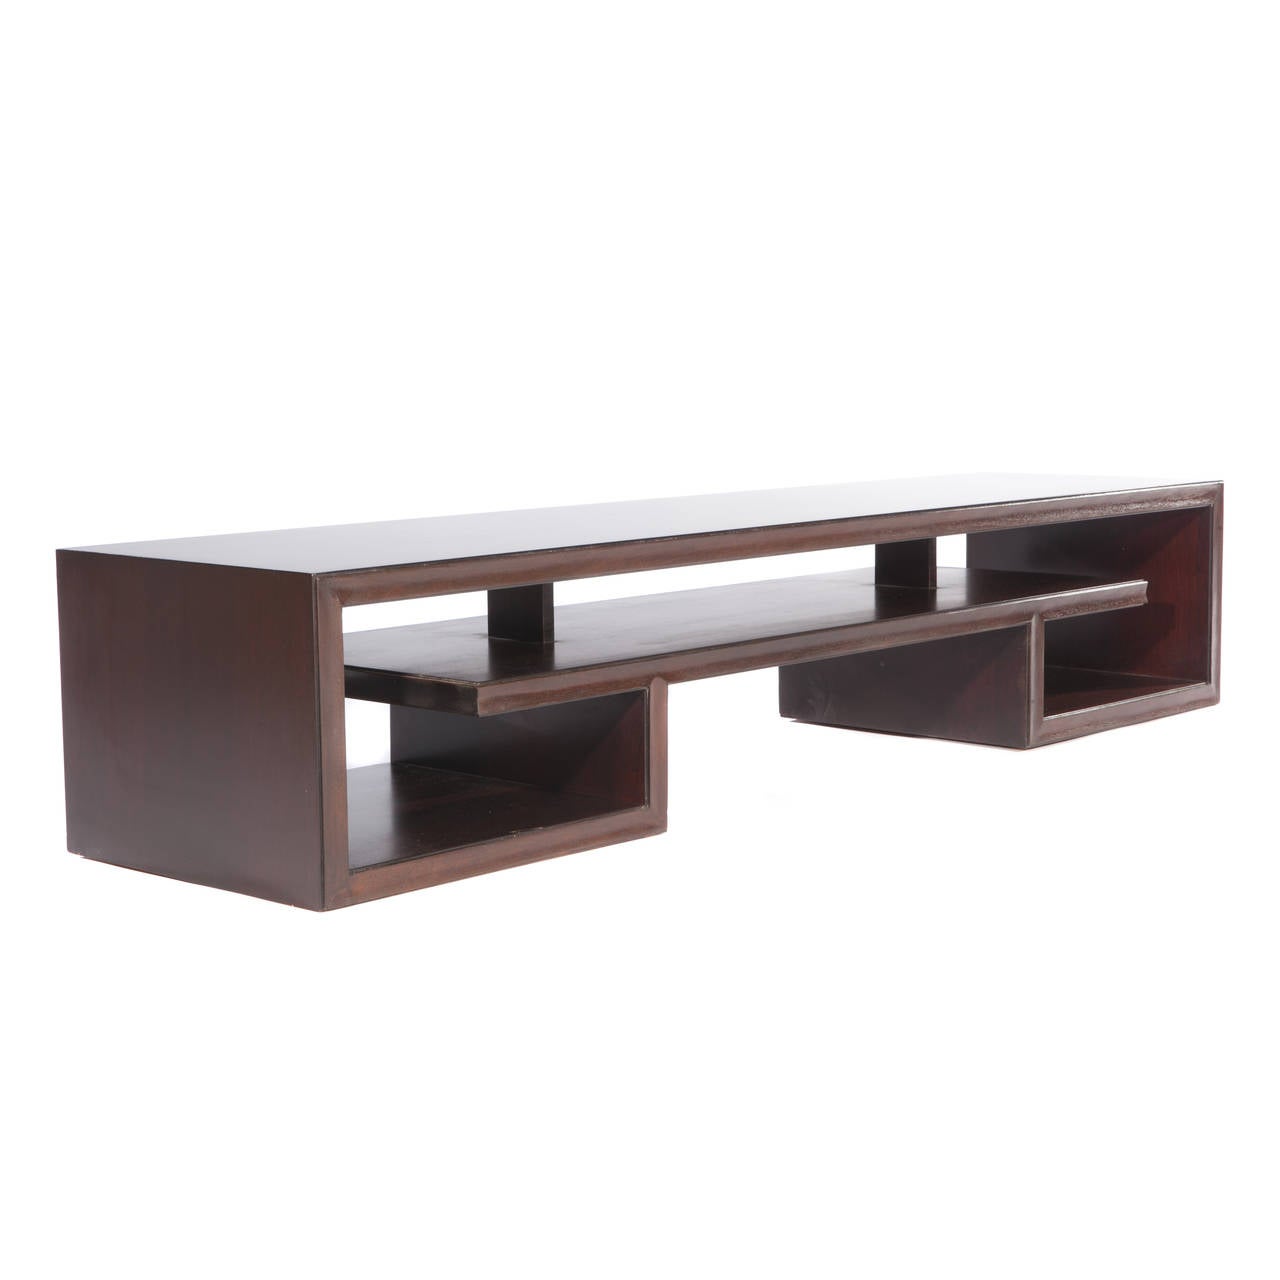 Long and low table featuring an architectural base with interlocking geometric shelf. Newly refinished in a dark, rich brown. We also have seen this piece used as a bench.